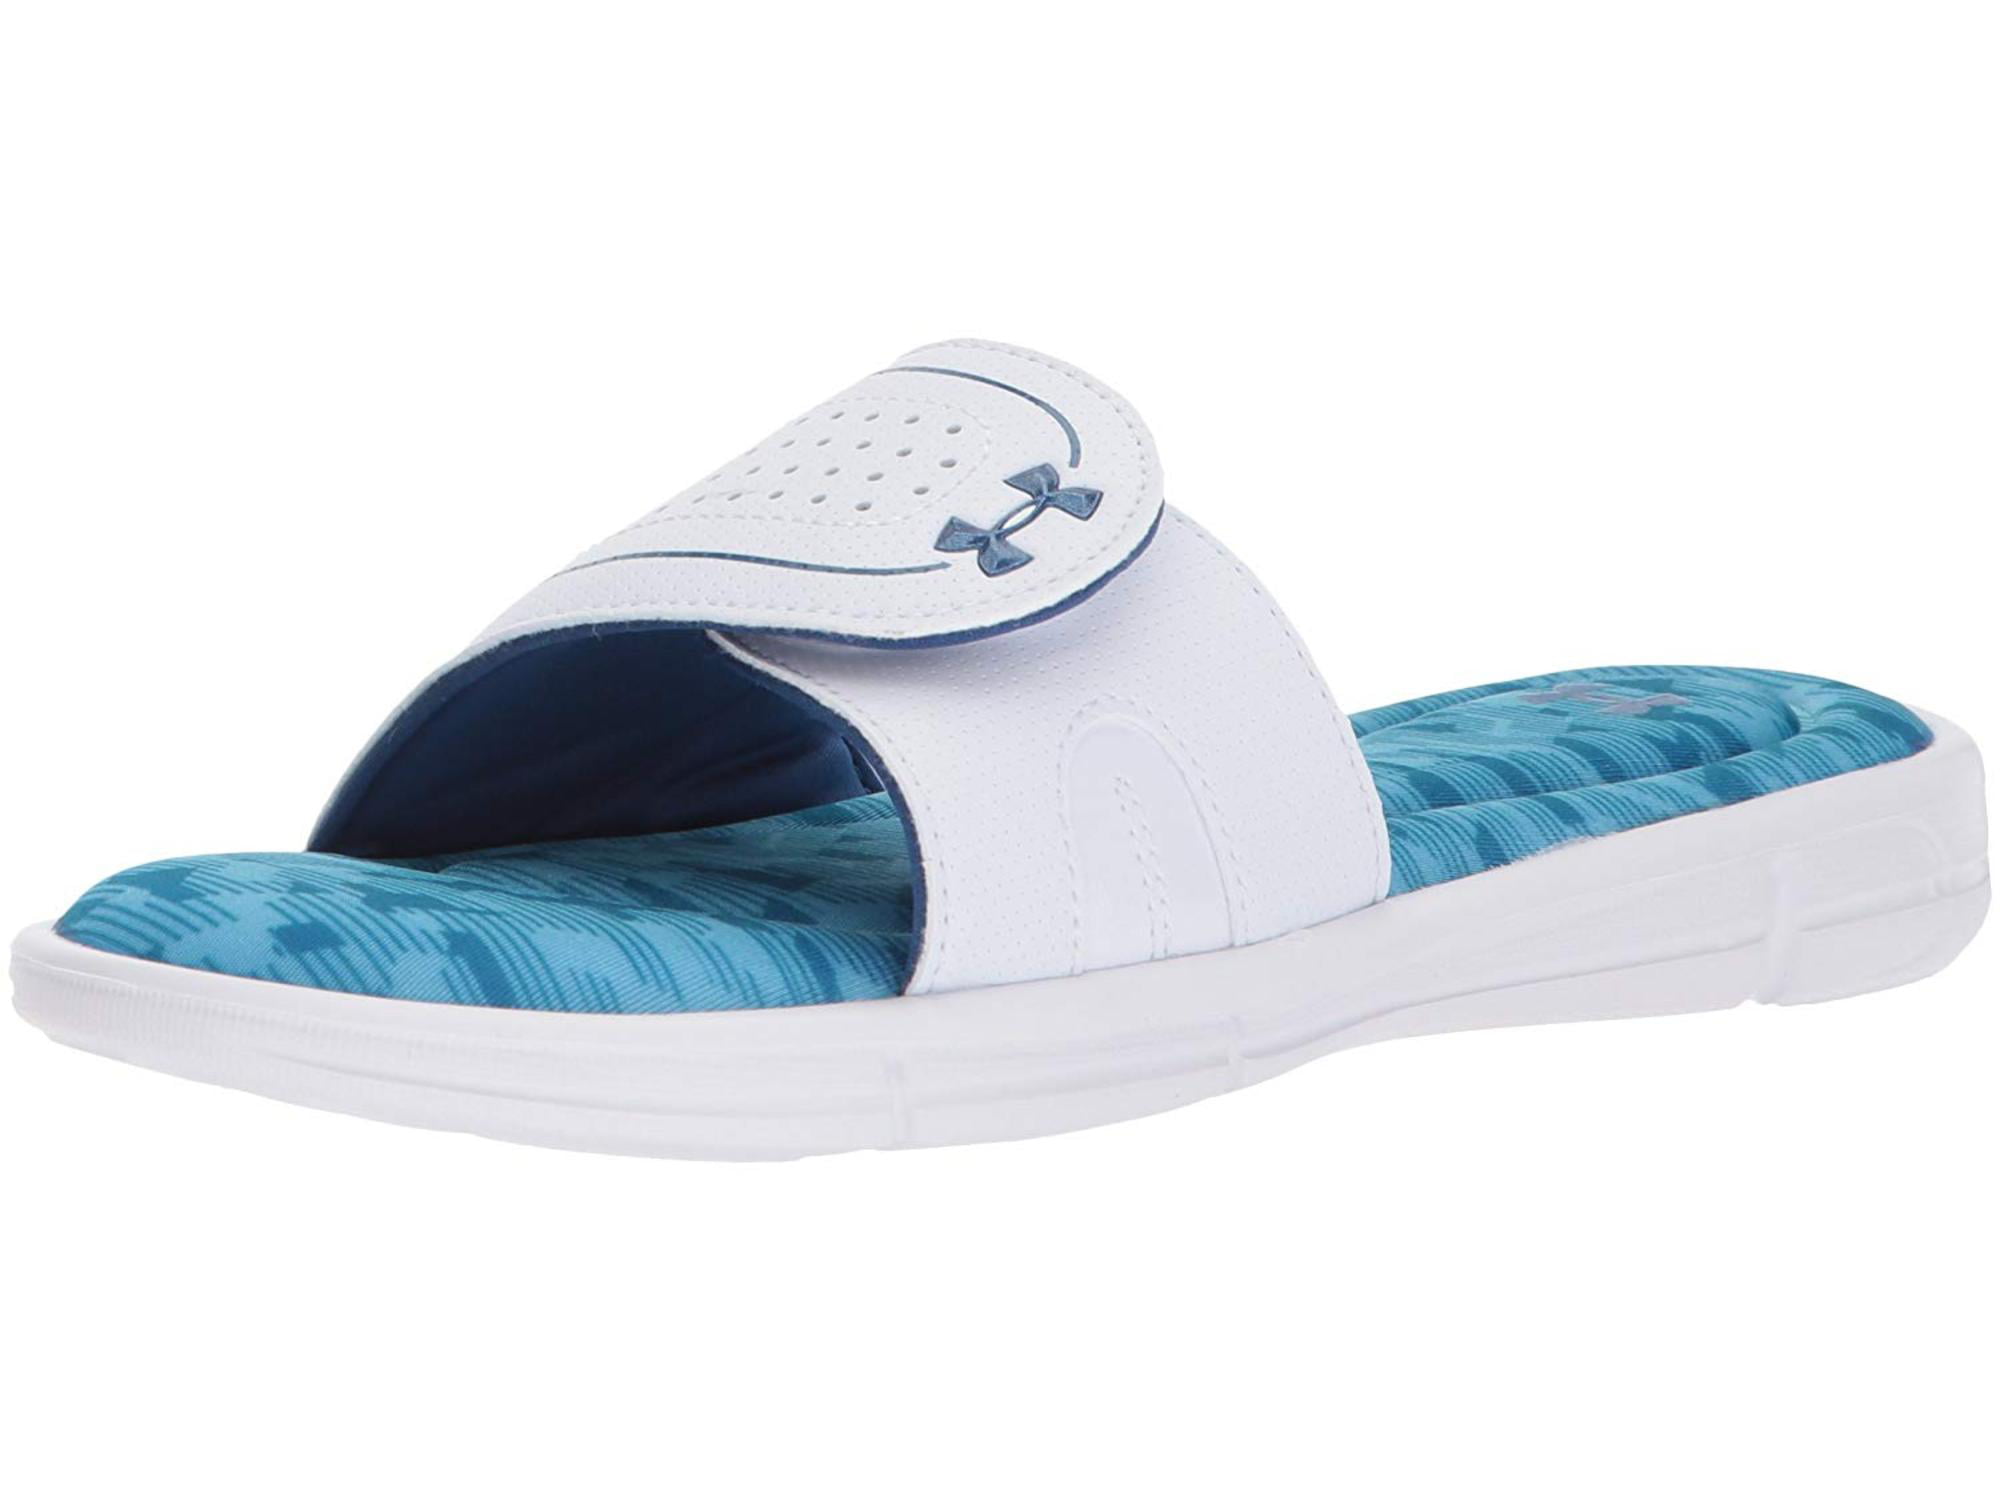 under armour sandals womens